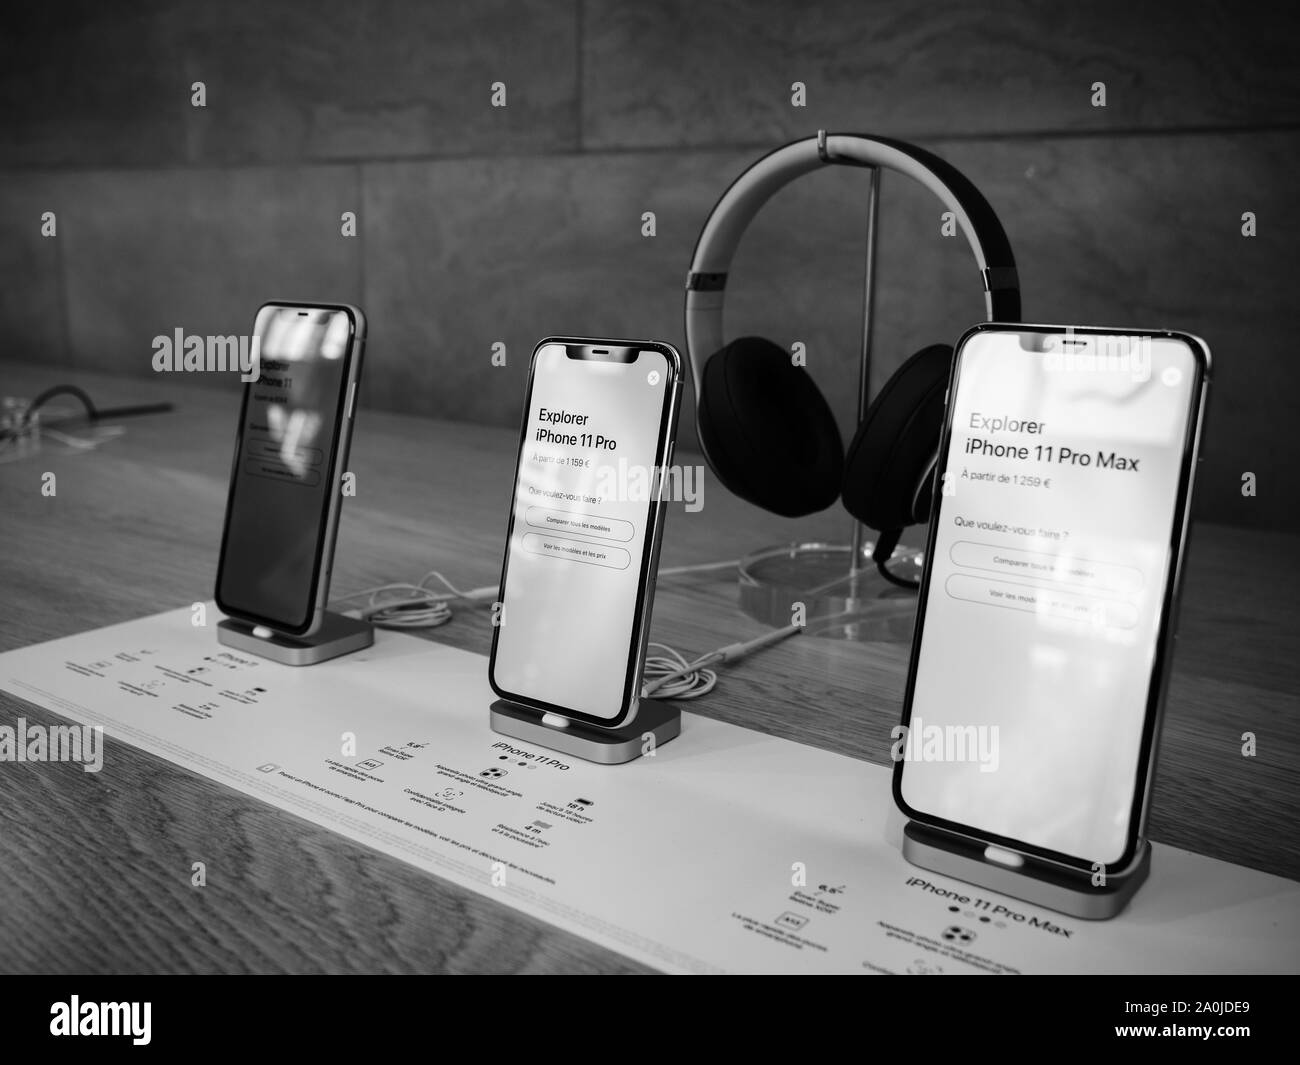 Paris, France - Sep 20, 2019: The new iPhone 11, 11 Pro and Pro Max range displayed in Apple Store next to Beats by Dr Dre Headphones black and white image Stock Photo